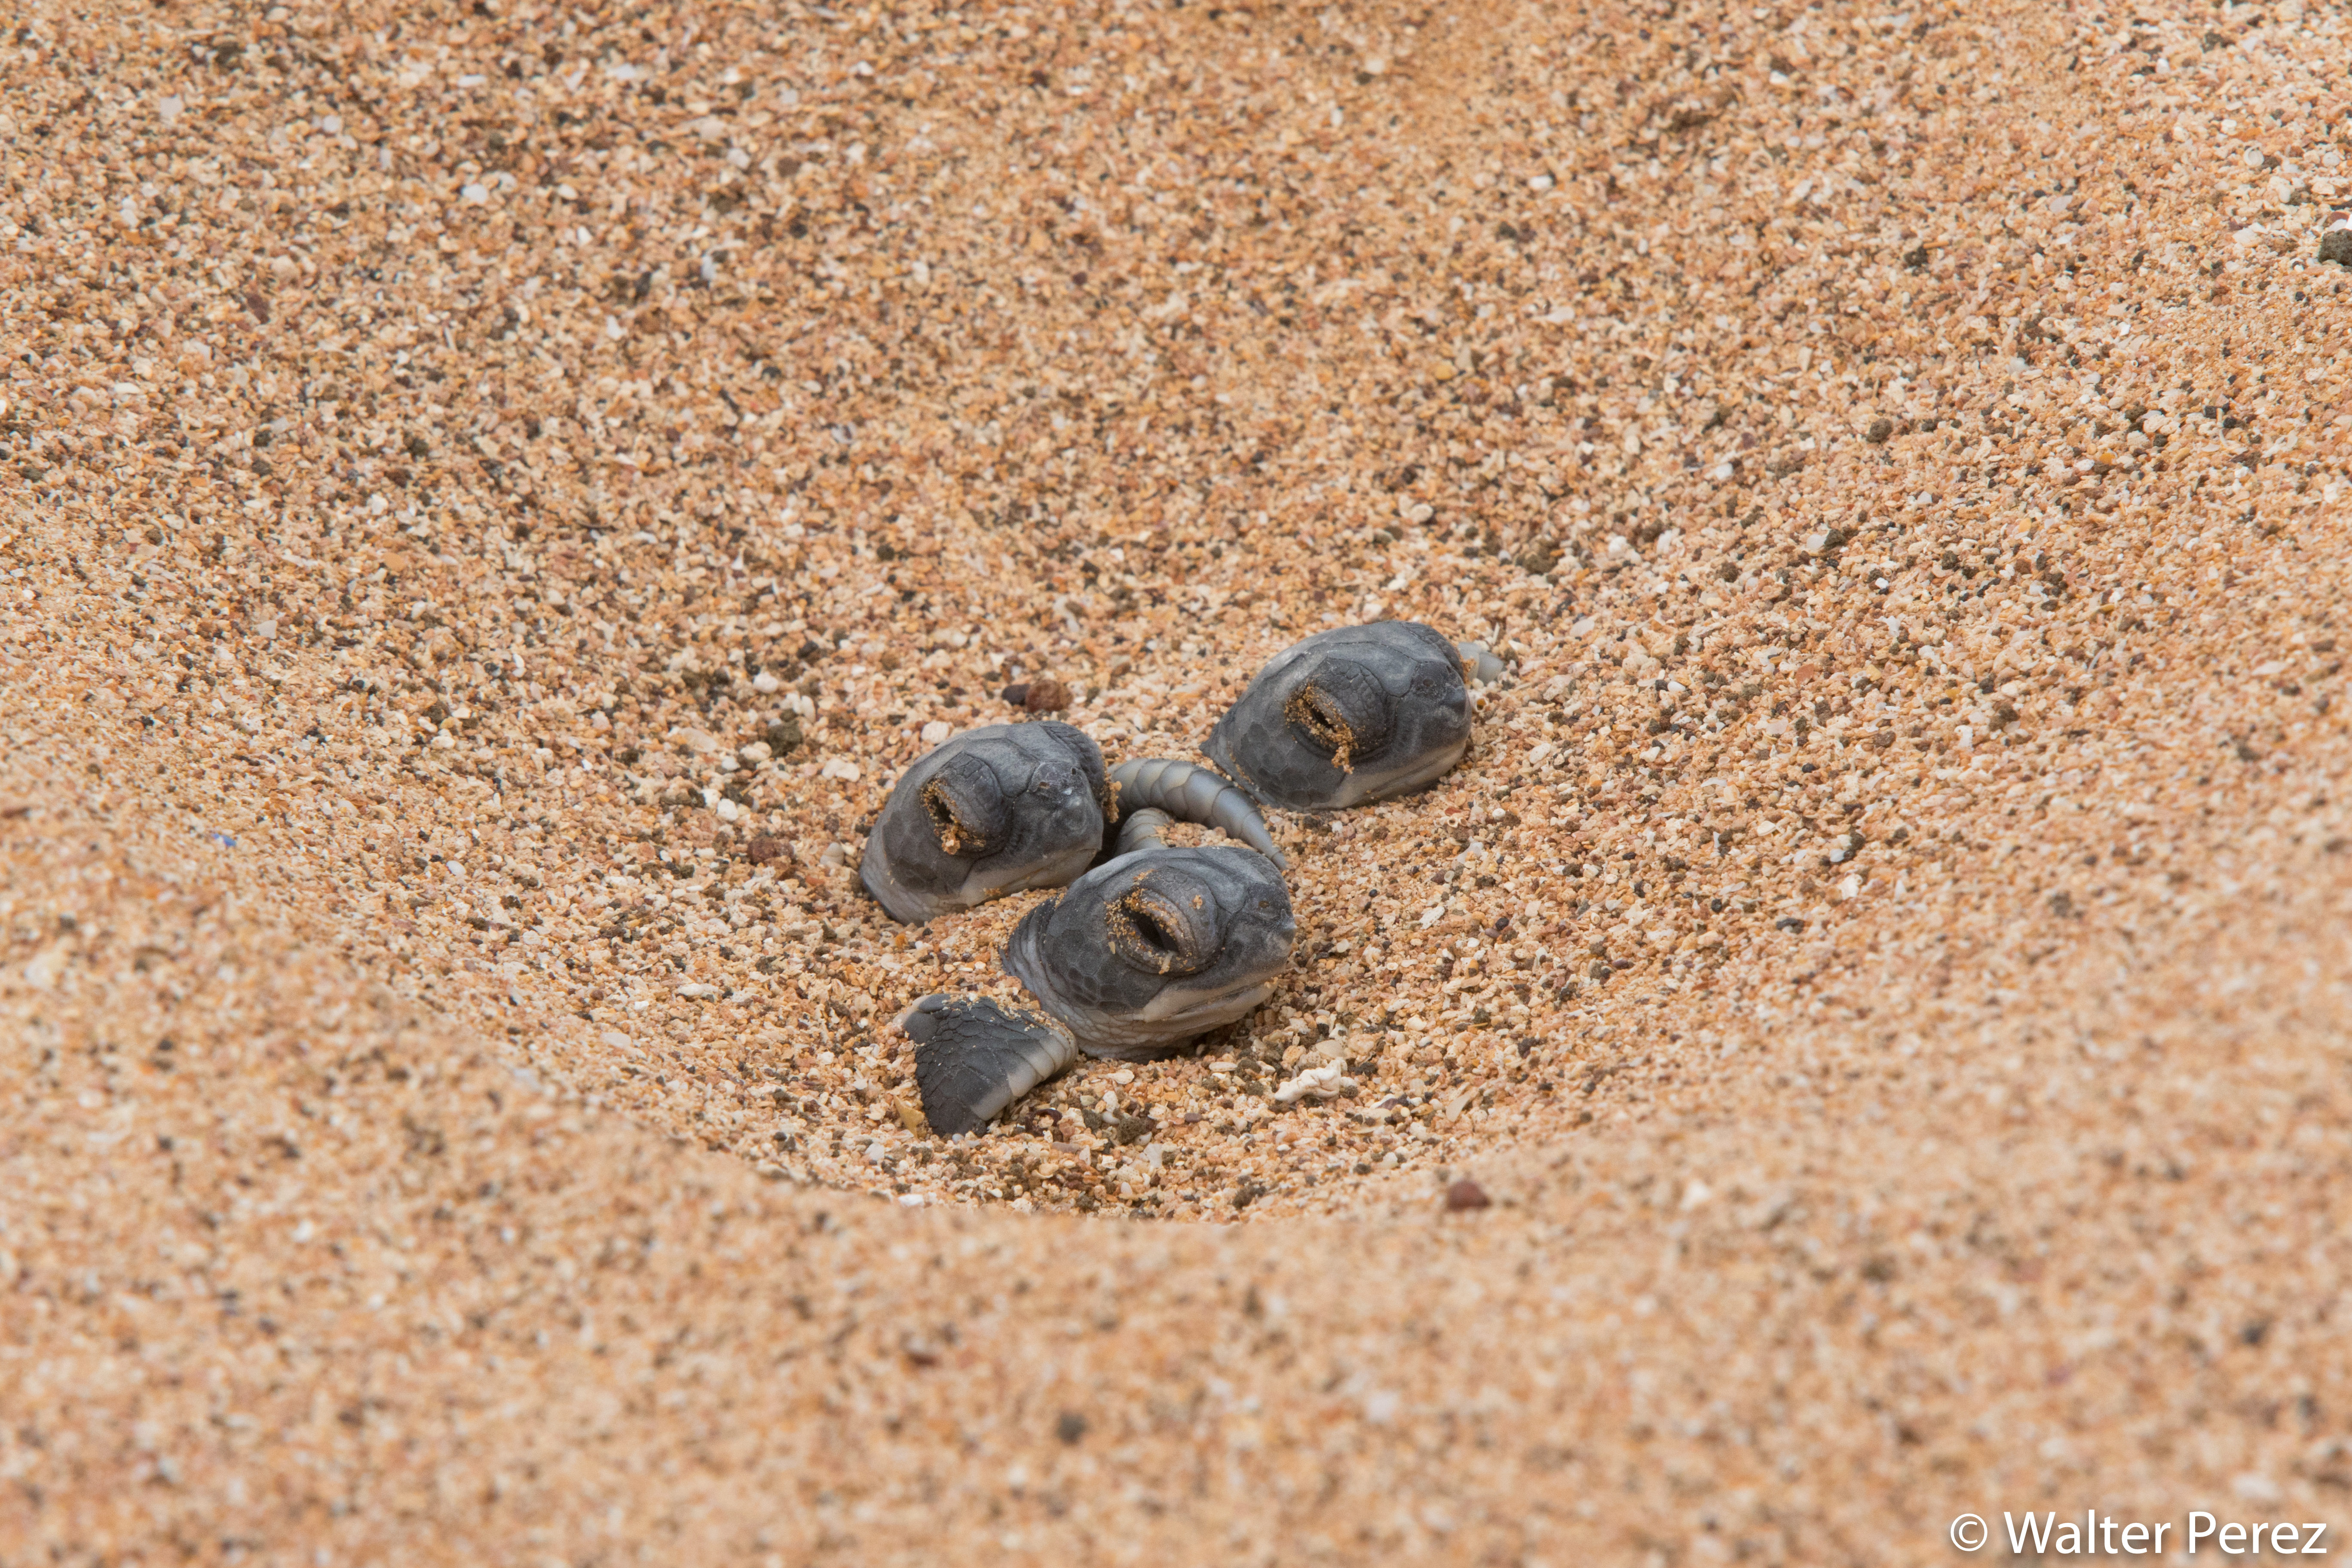 Young Pacific Green Turtles (©Walter Perez)